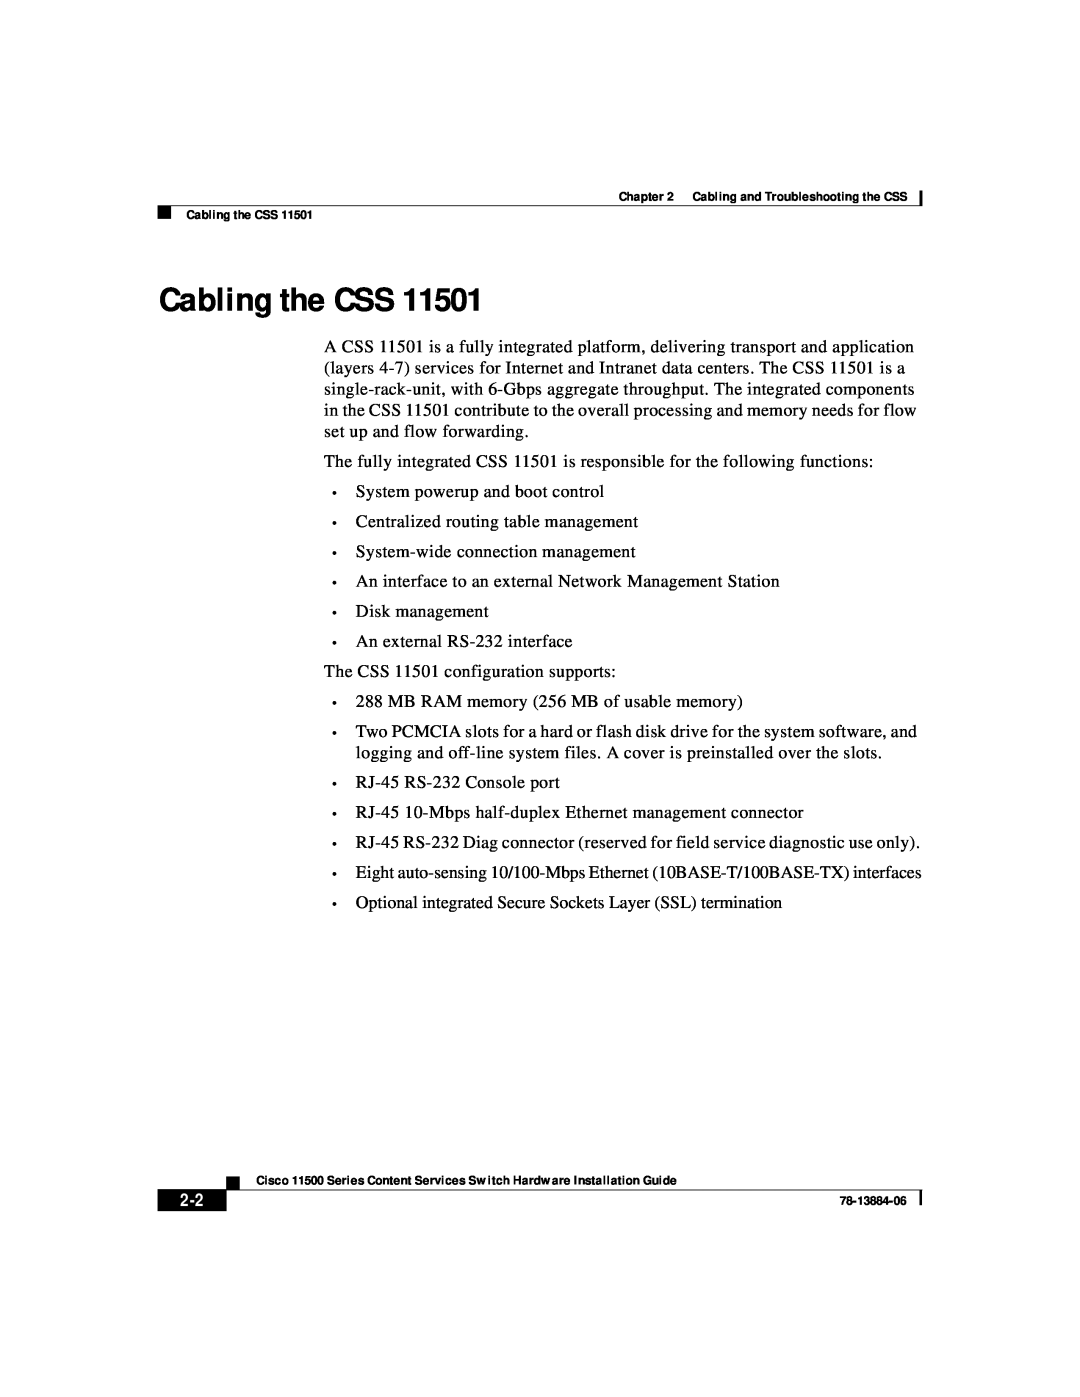 Cisco Systems 11500 Series manual Cabling the CSS 